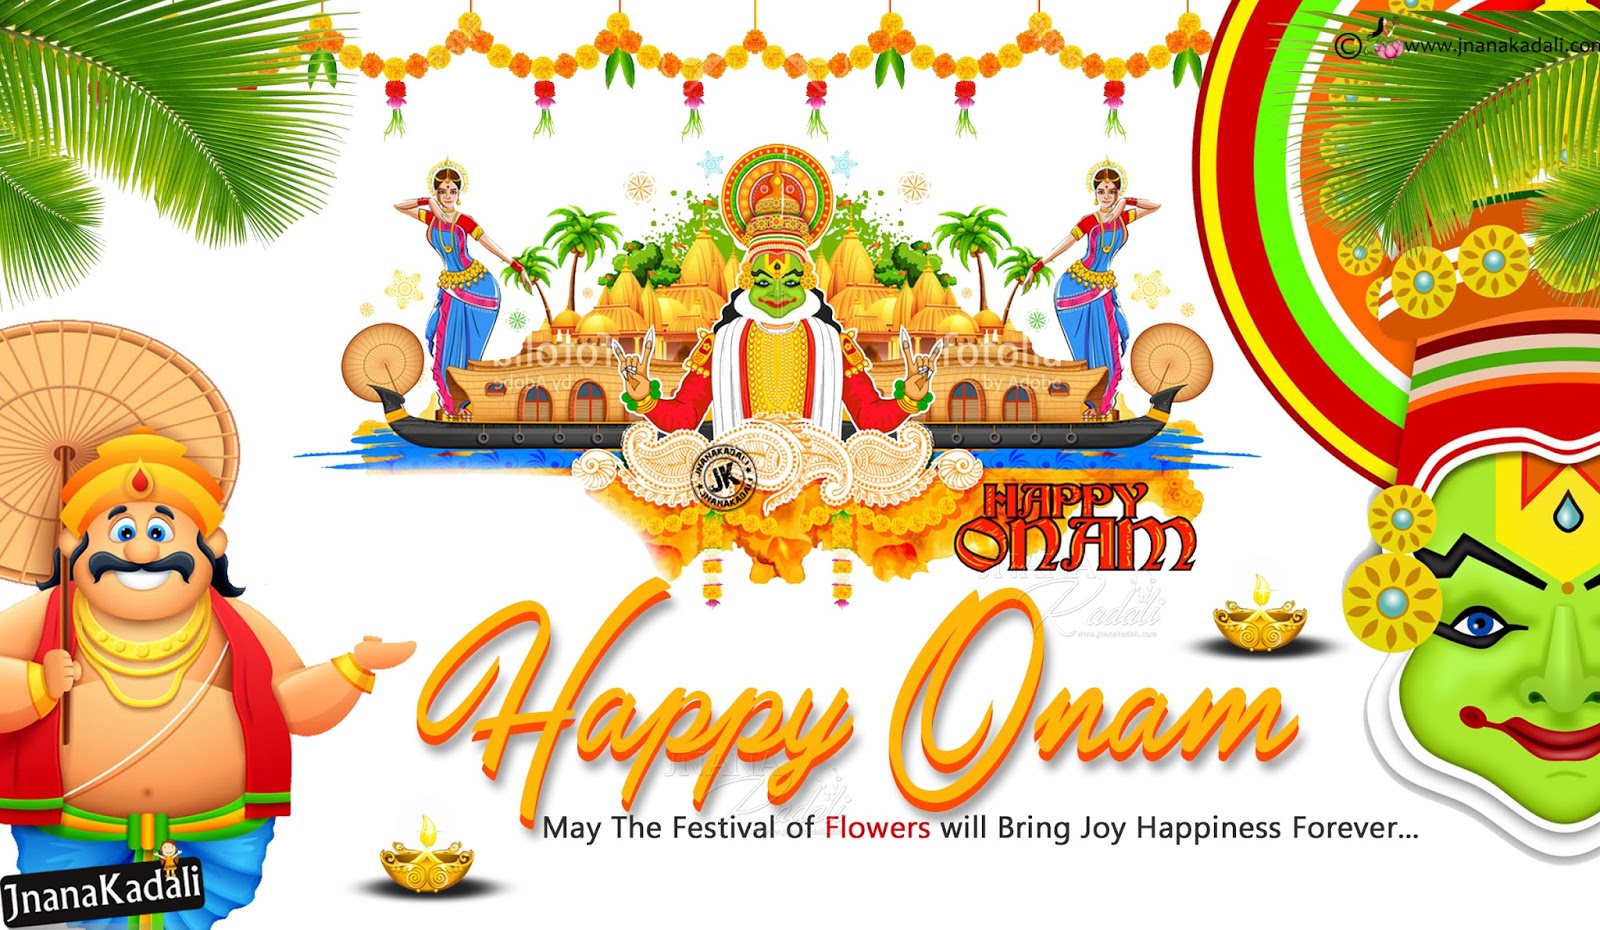 Onam Wishes Flower Wallpaper Hd Wallpaper Wallpapers Onam Images | The ...